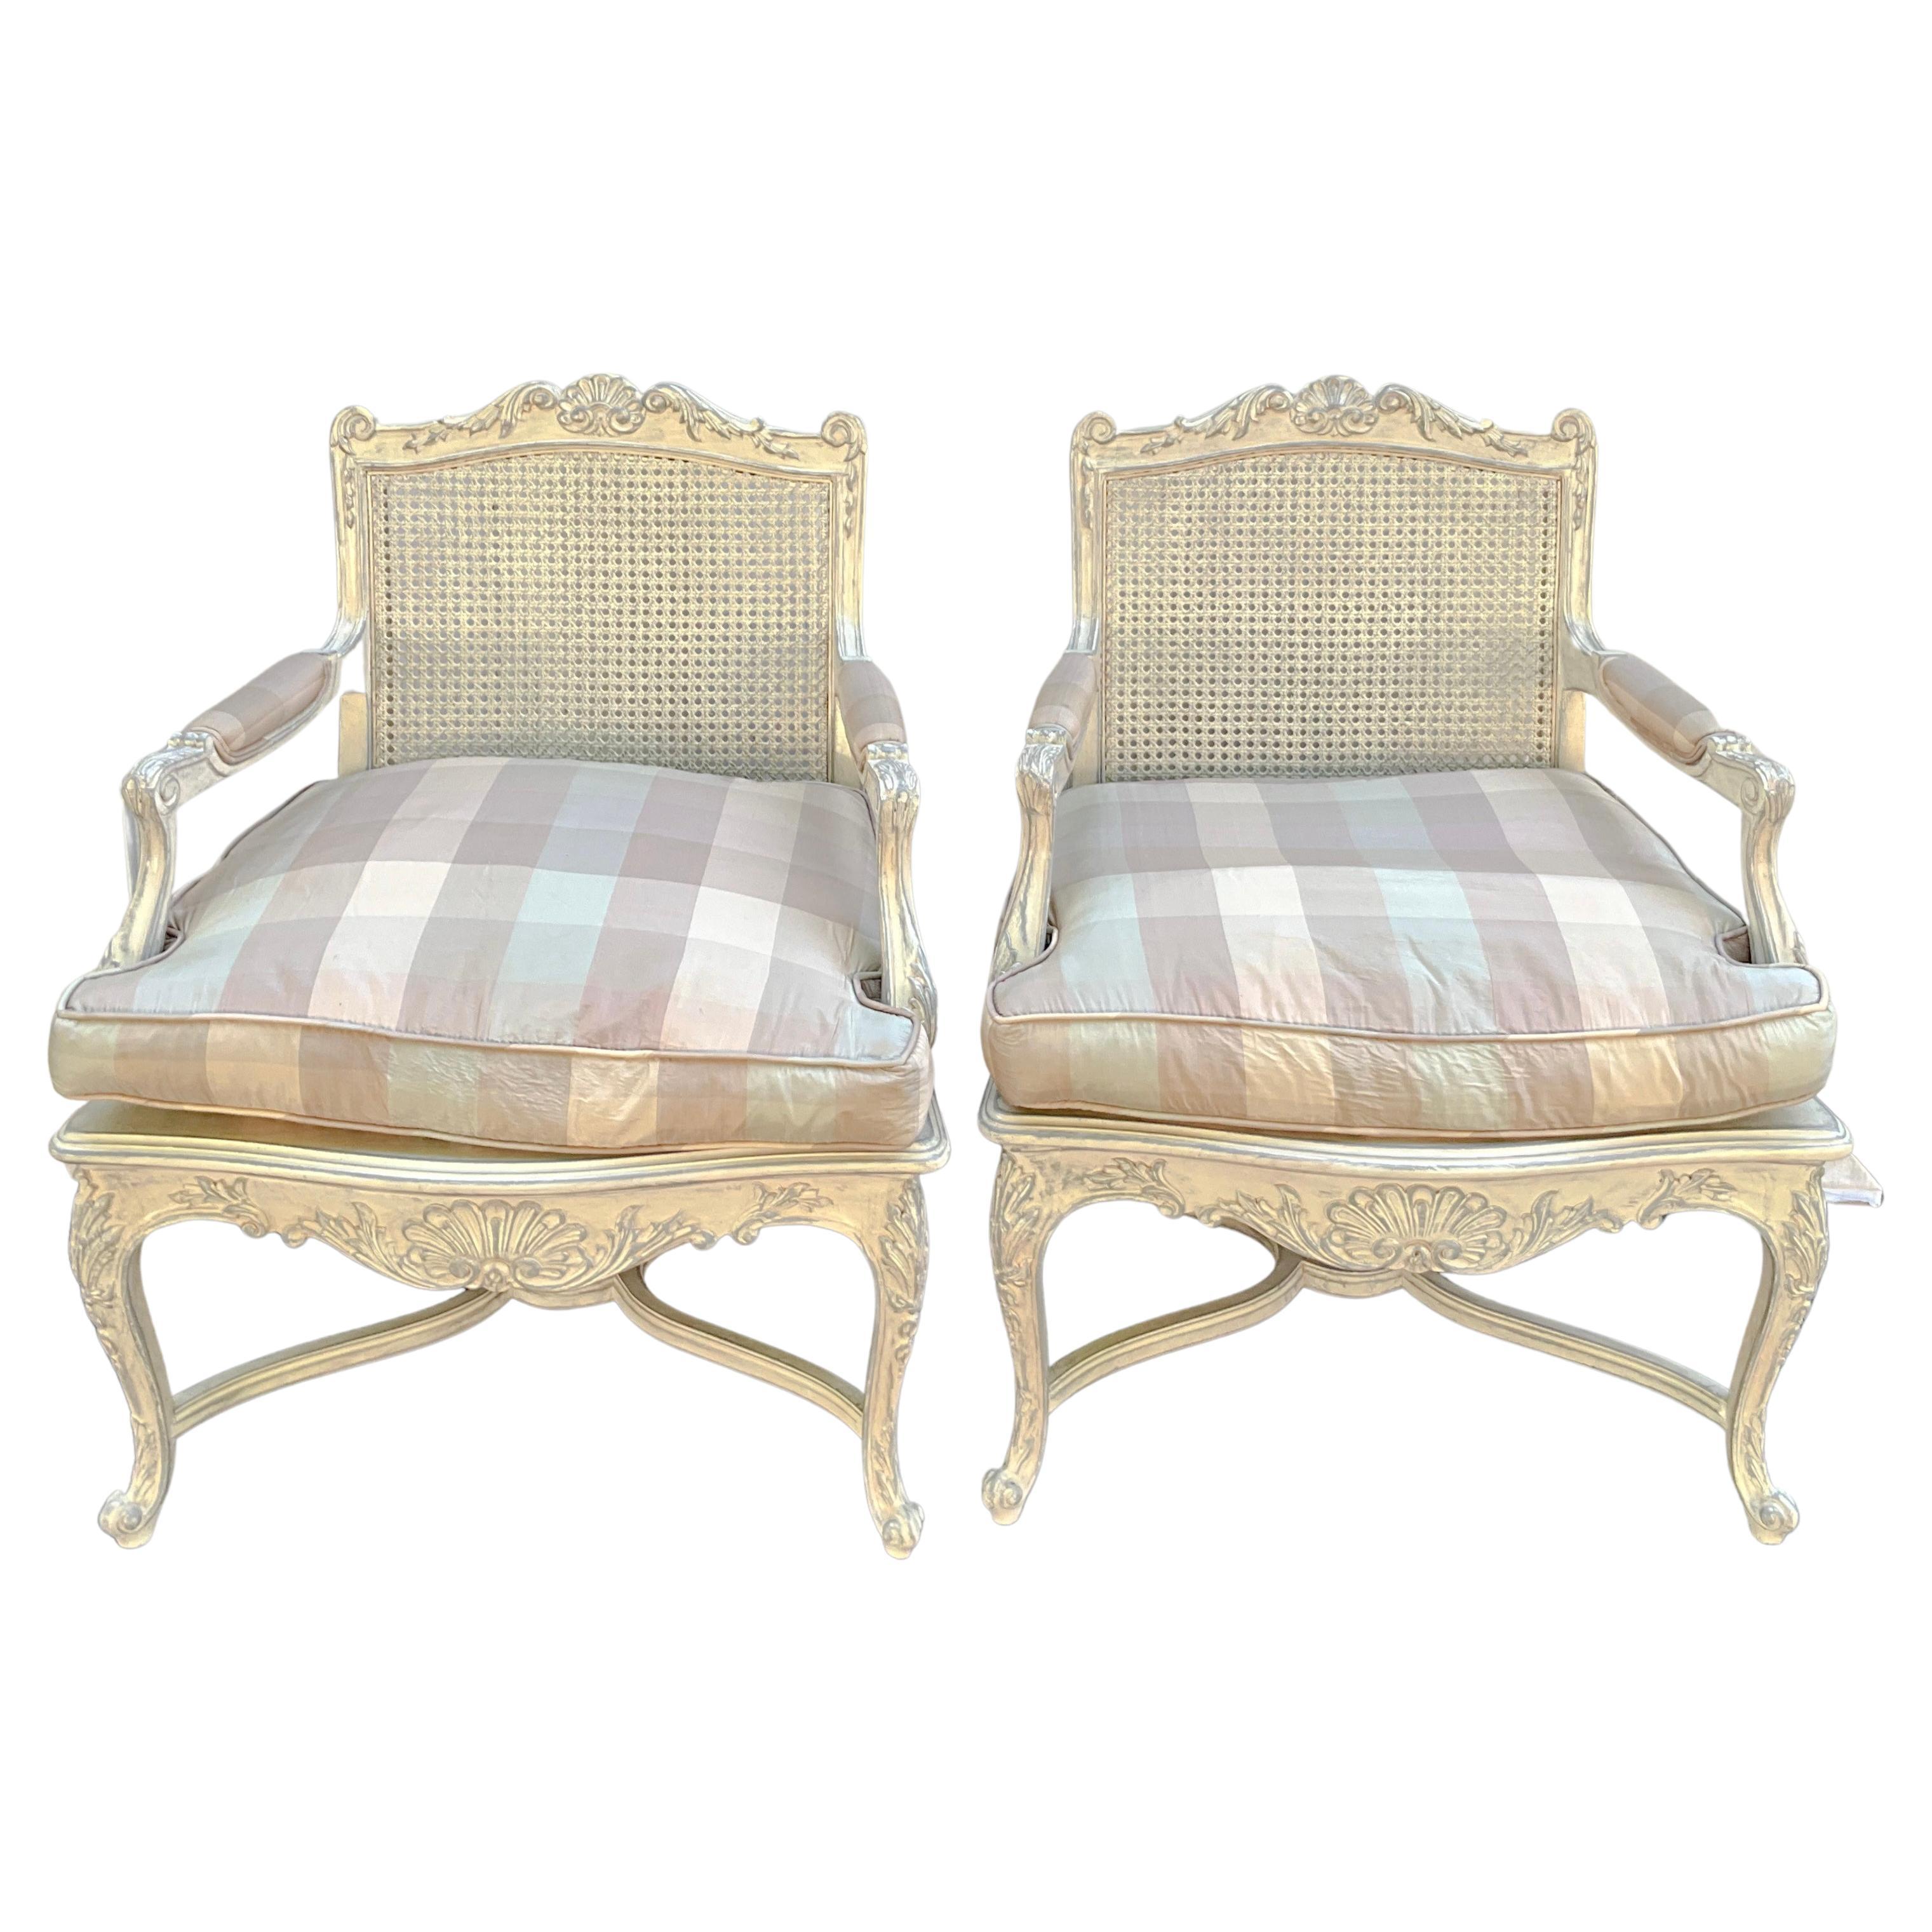 American French Louis XV Style Carved Shell & Painted Caned Bergere Chairs -Pair For Sale